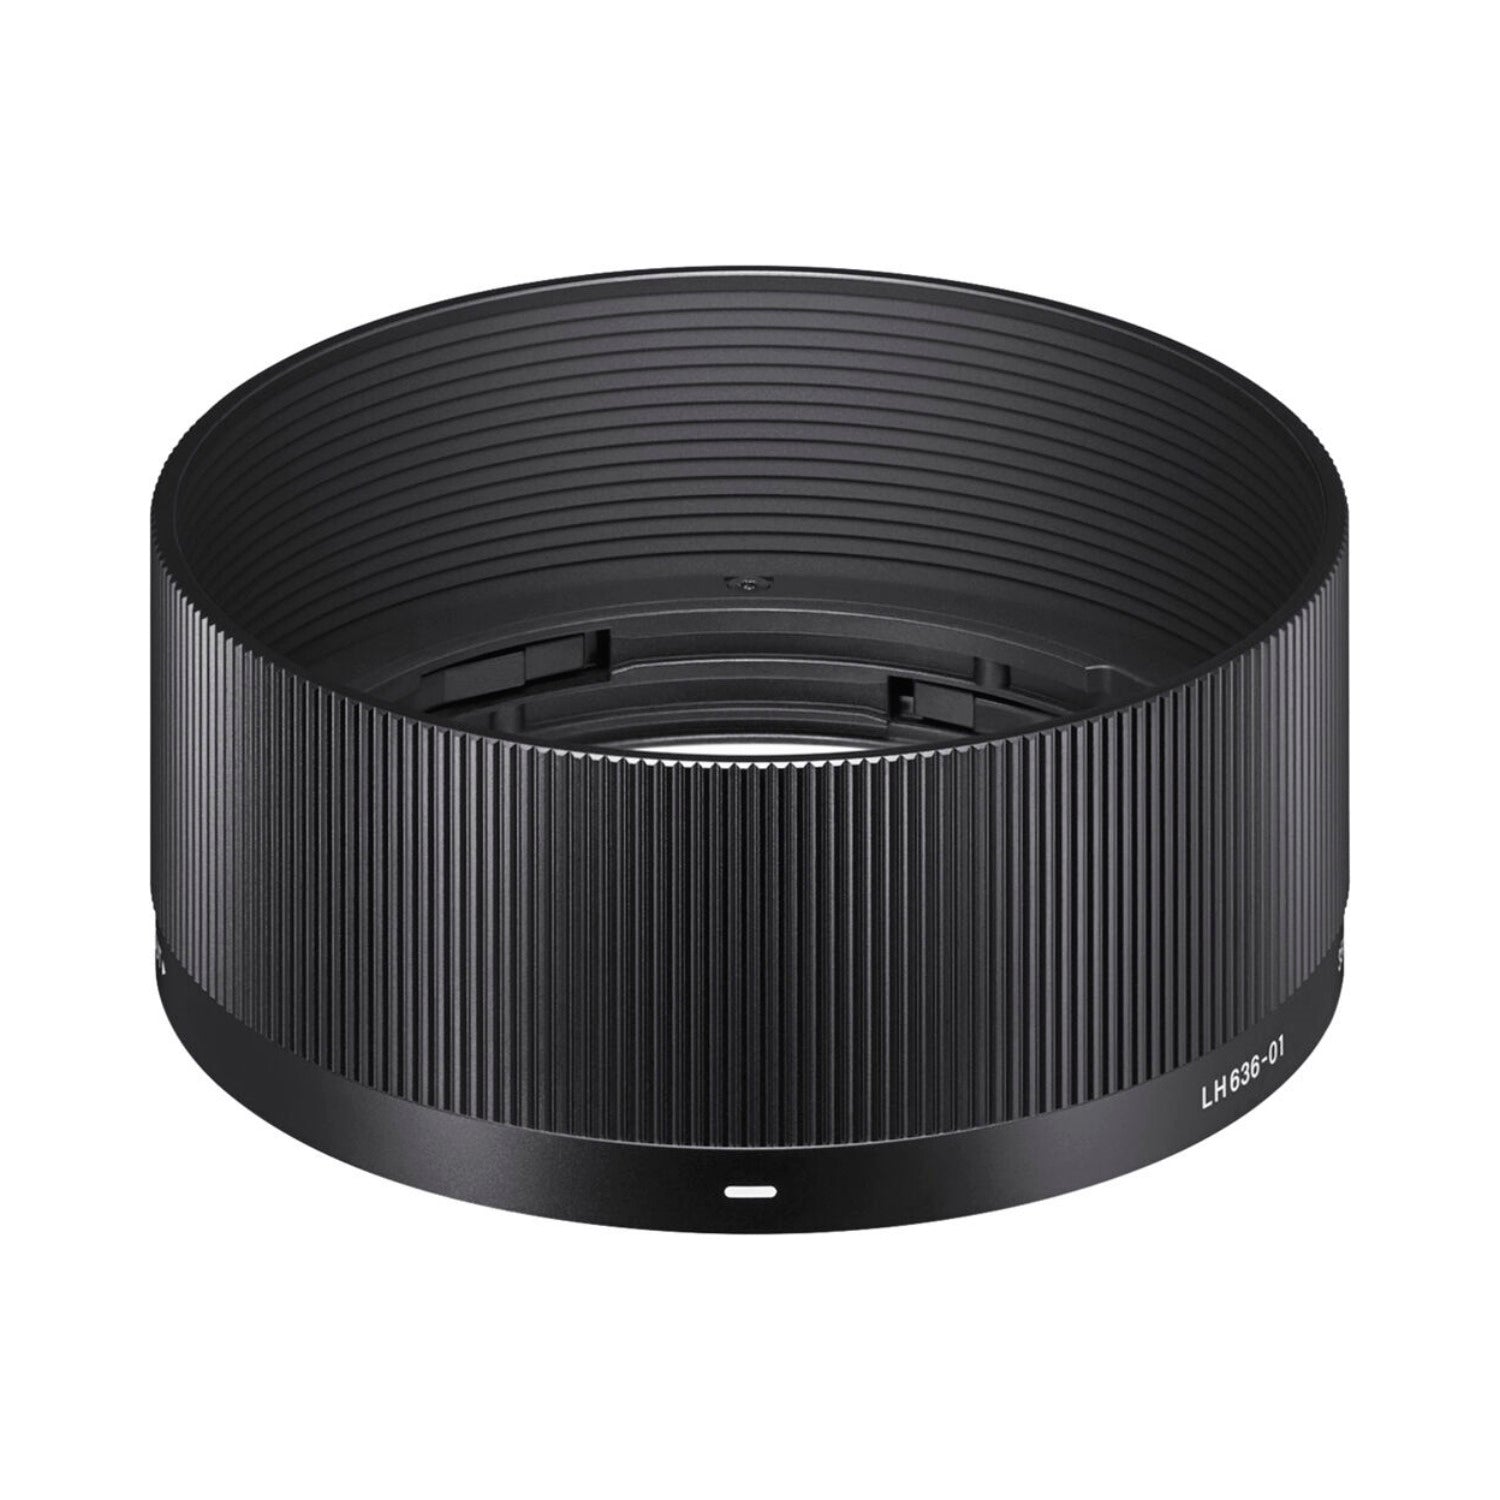 Lens Hood LH636-01 for 35mm F2 DG DN Contemporary